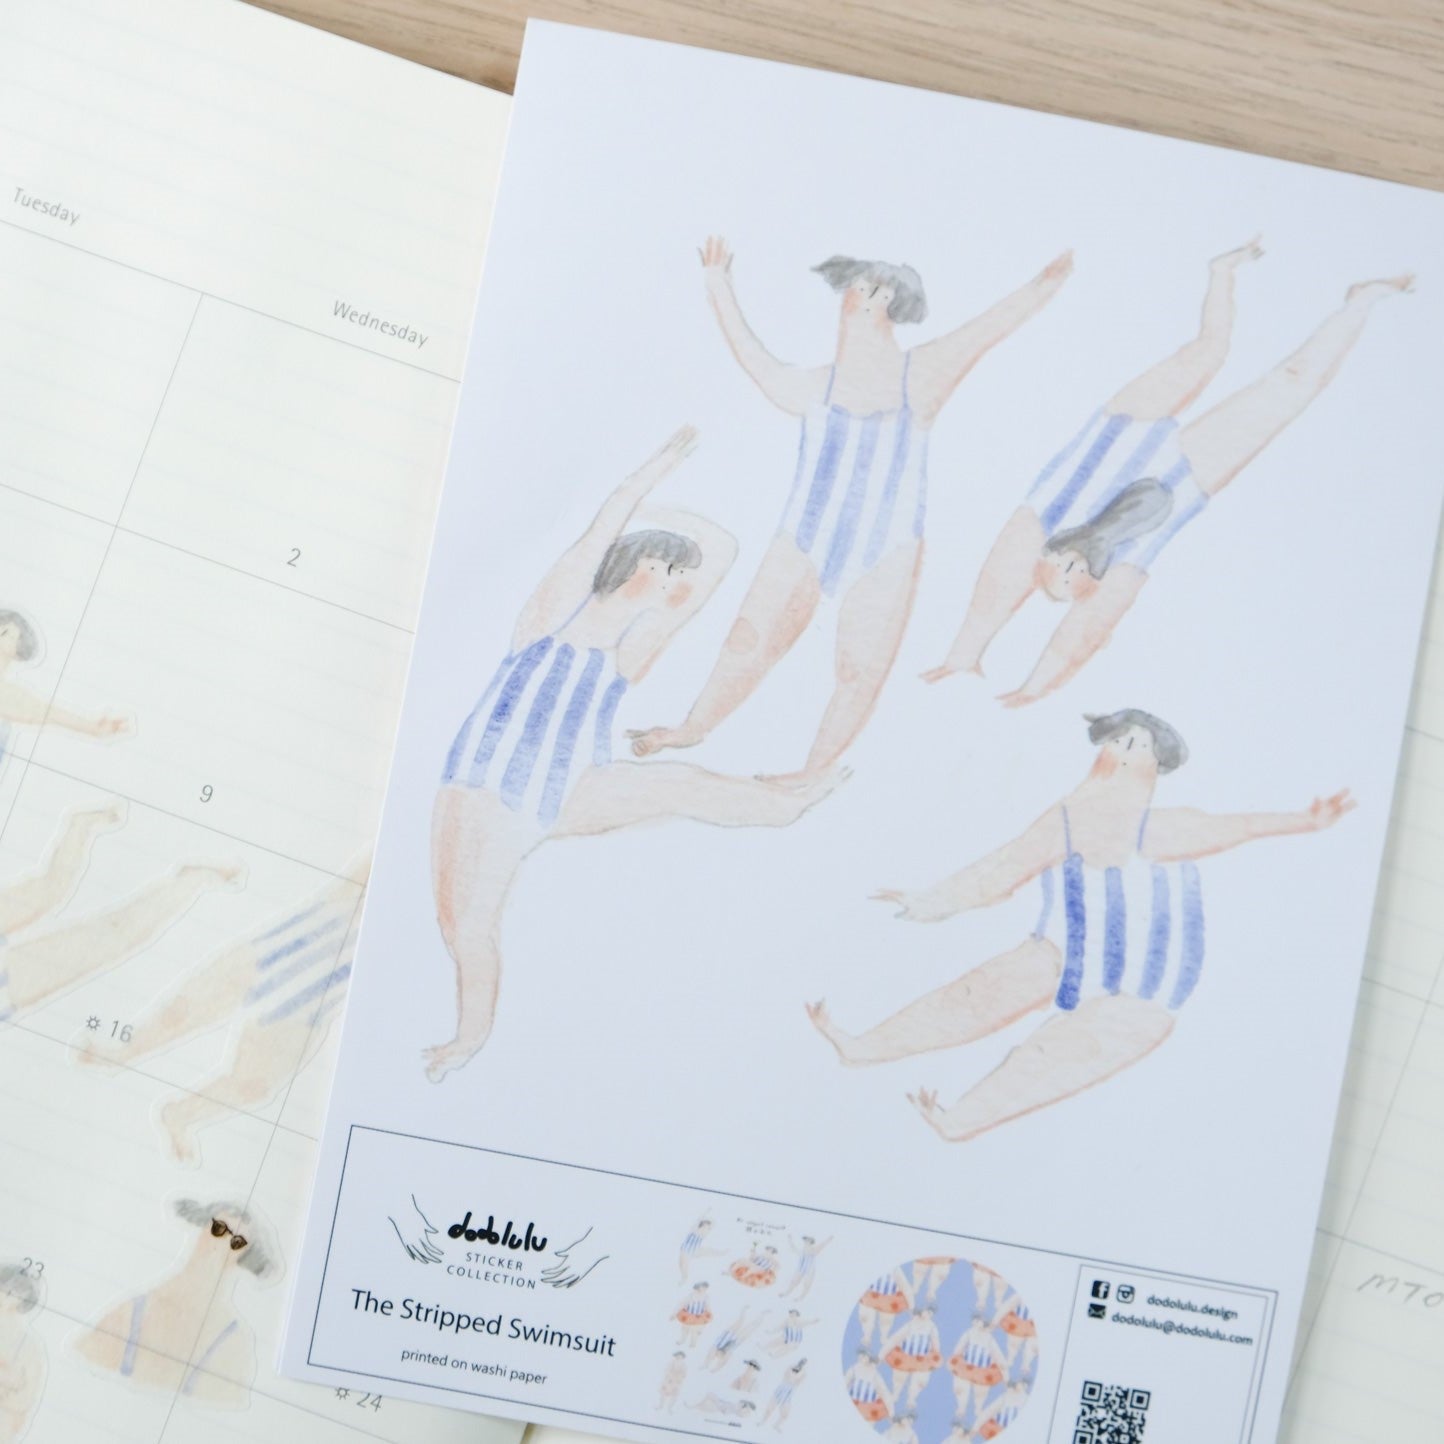 The Stripped Swimsuit - Sticker Sheet